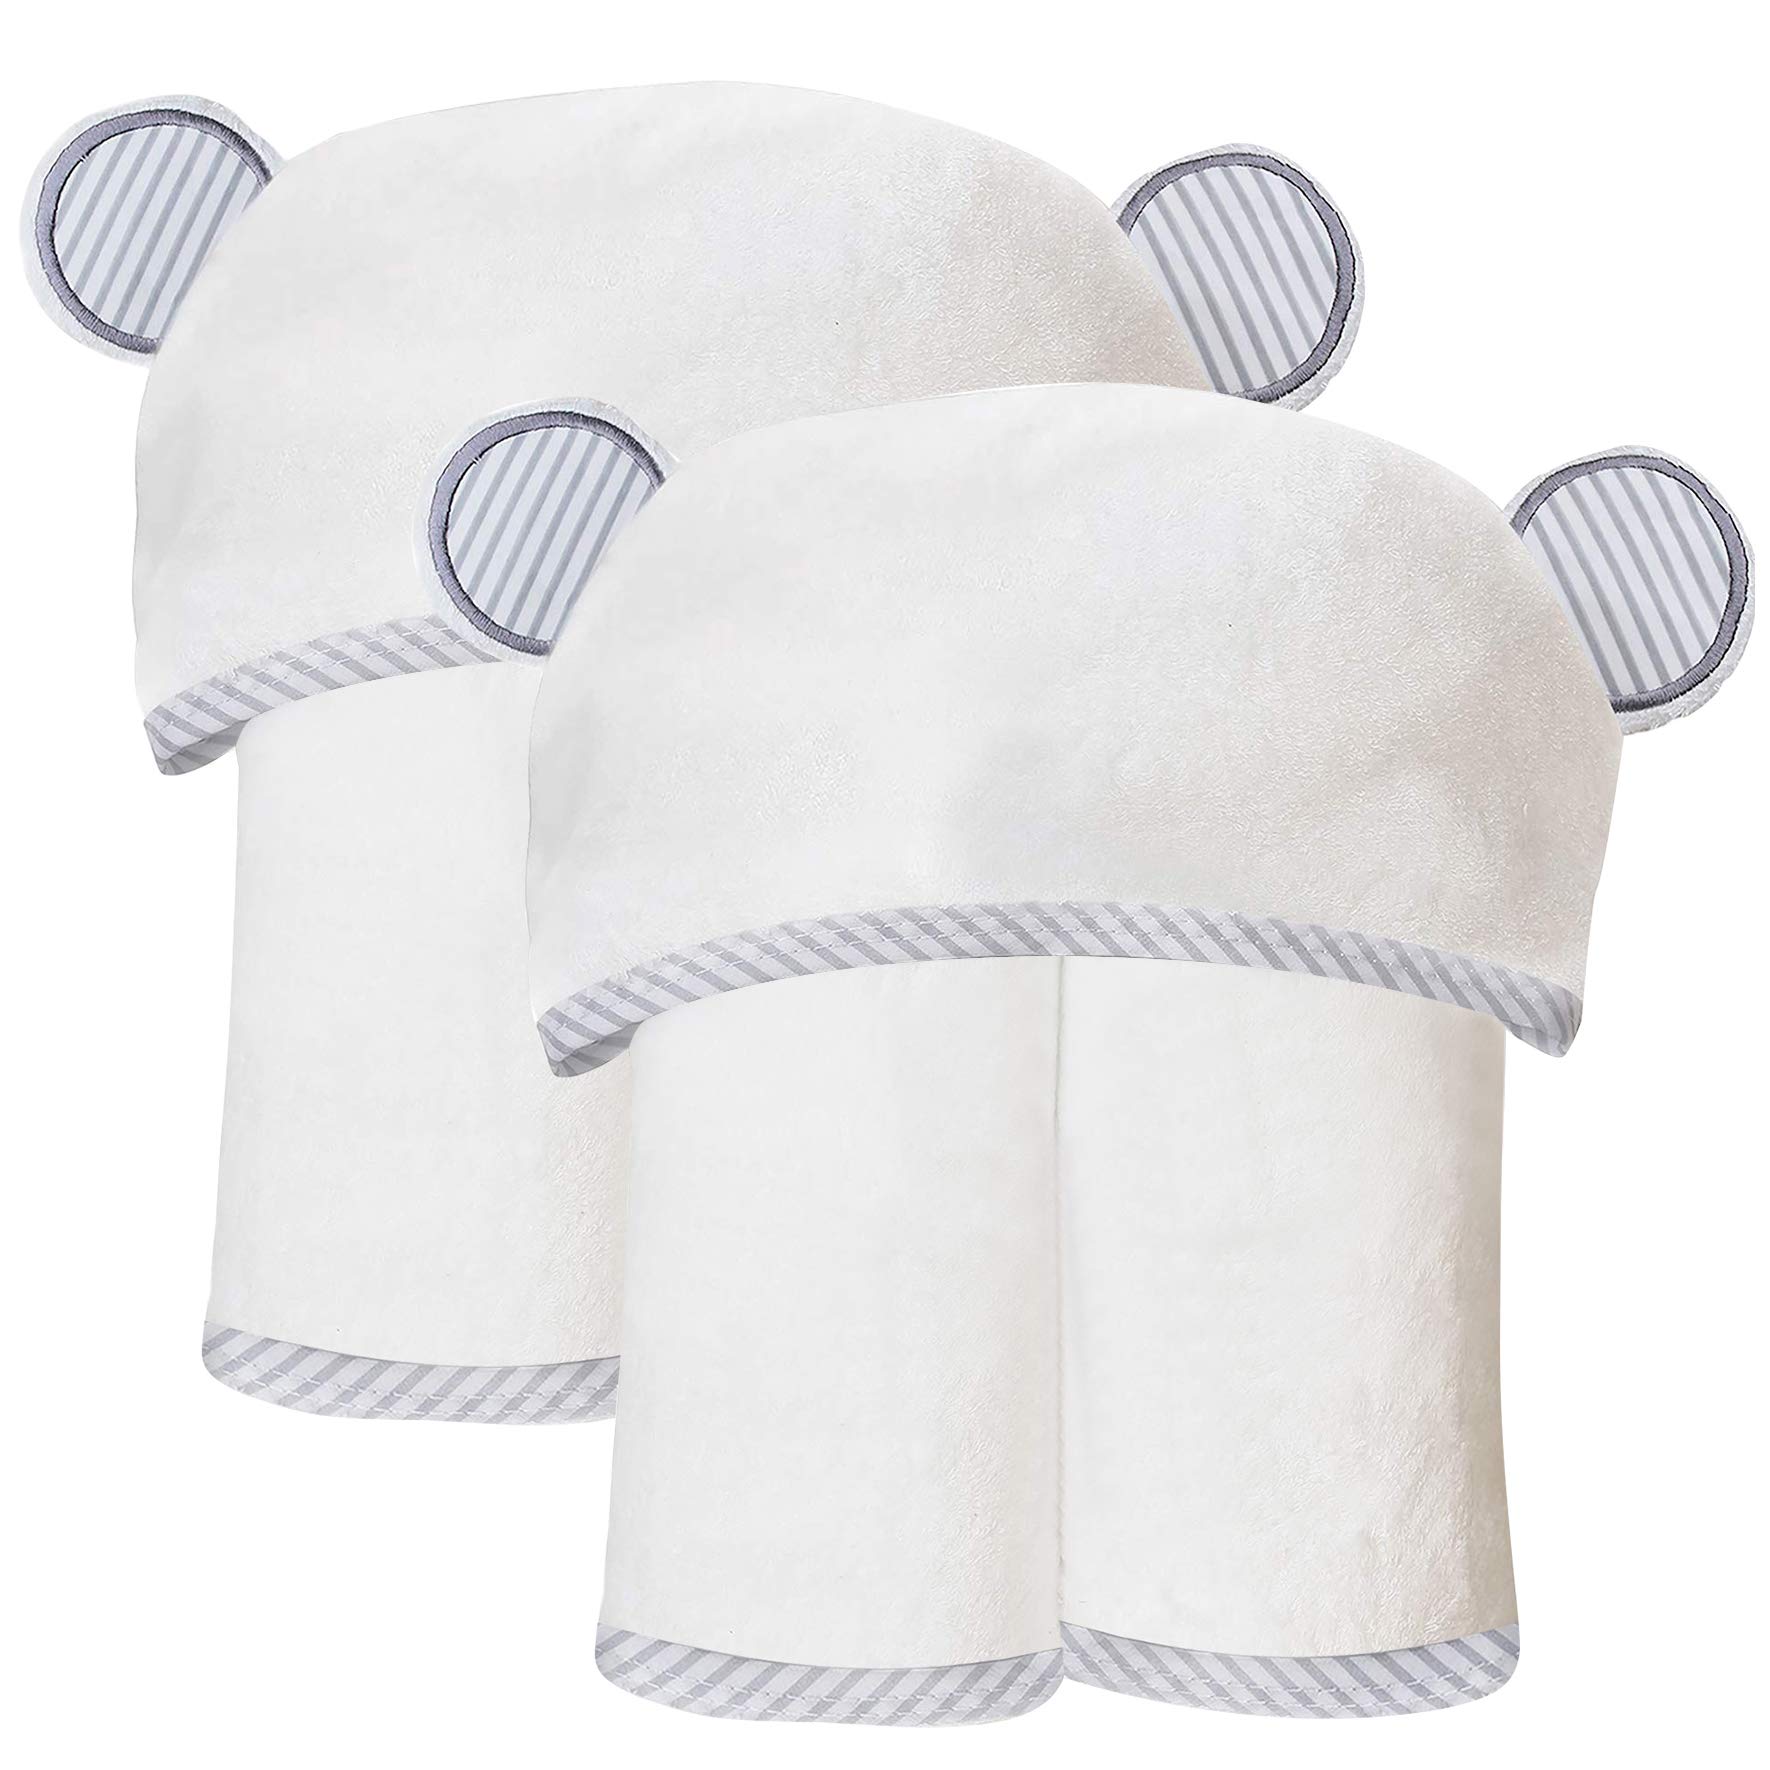 Durable Large Bamboo Baby Bath Towel Ultra Absorbent